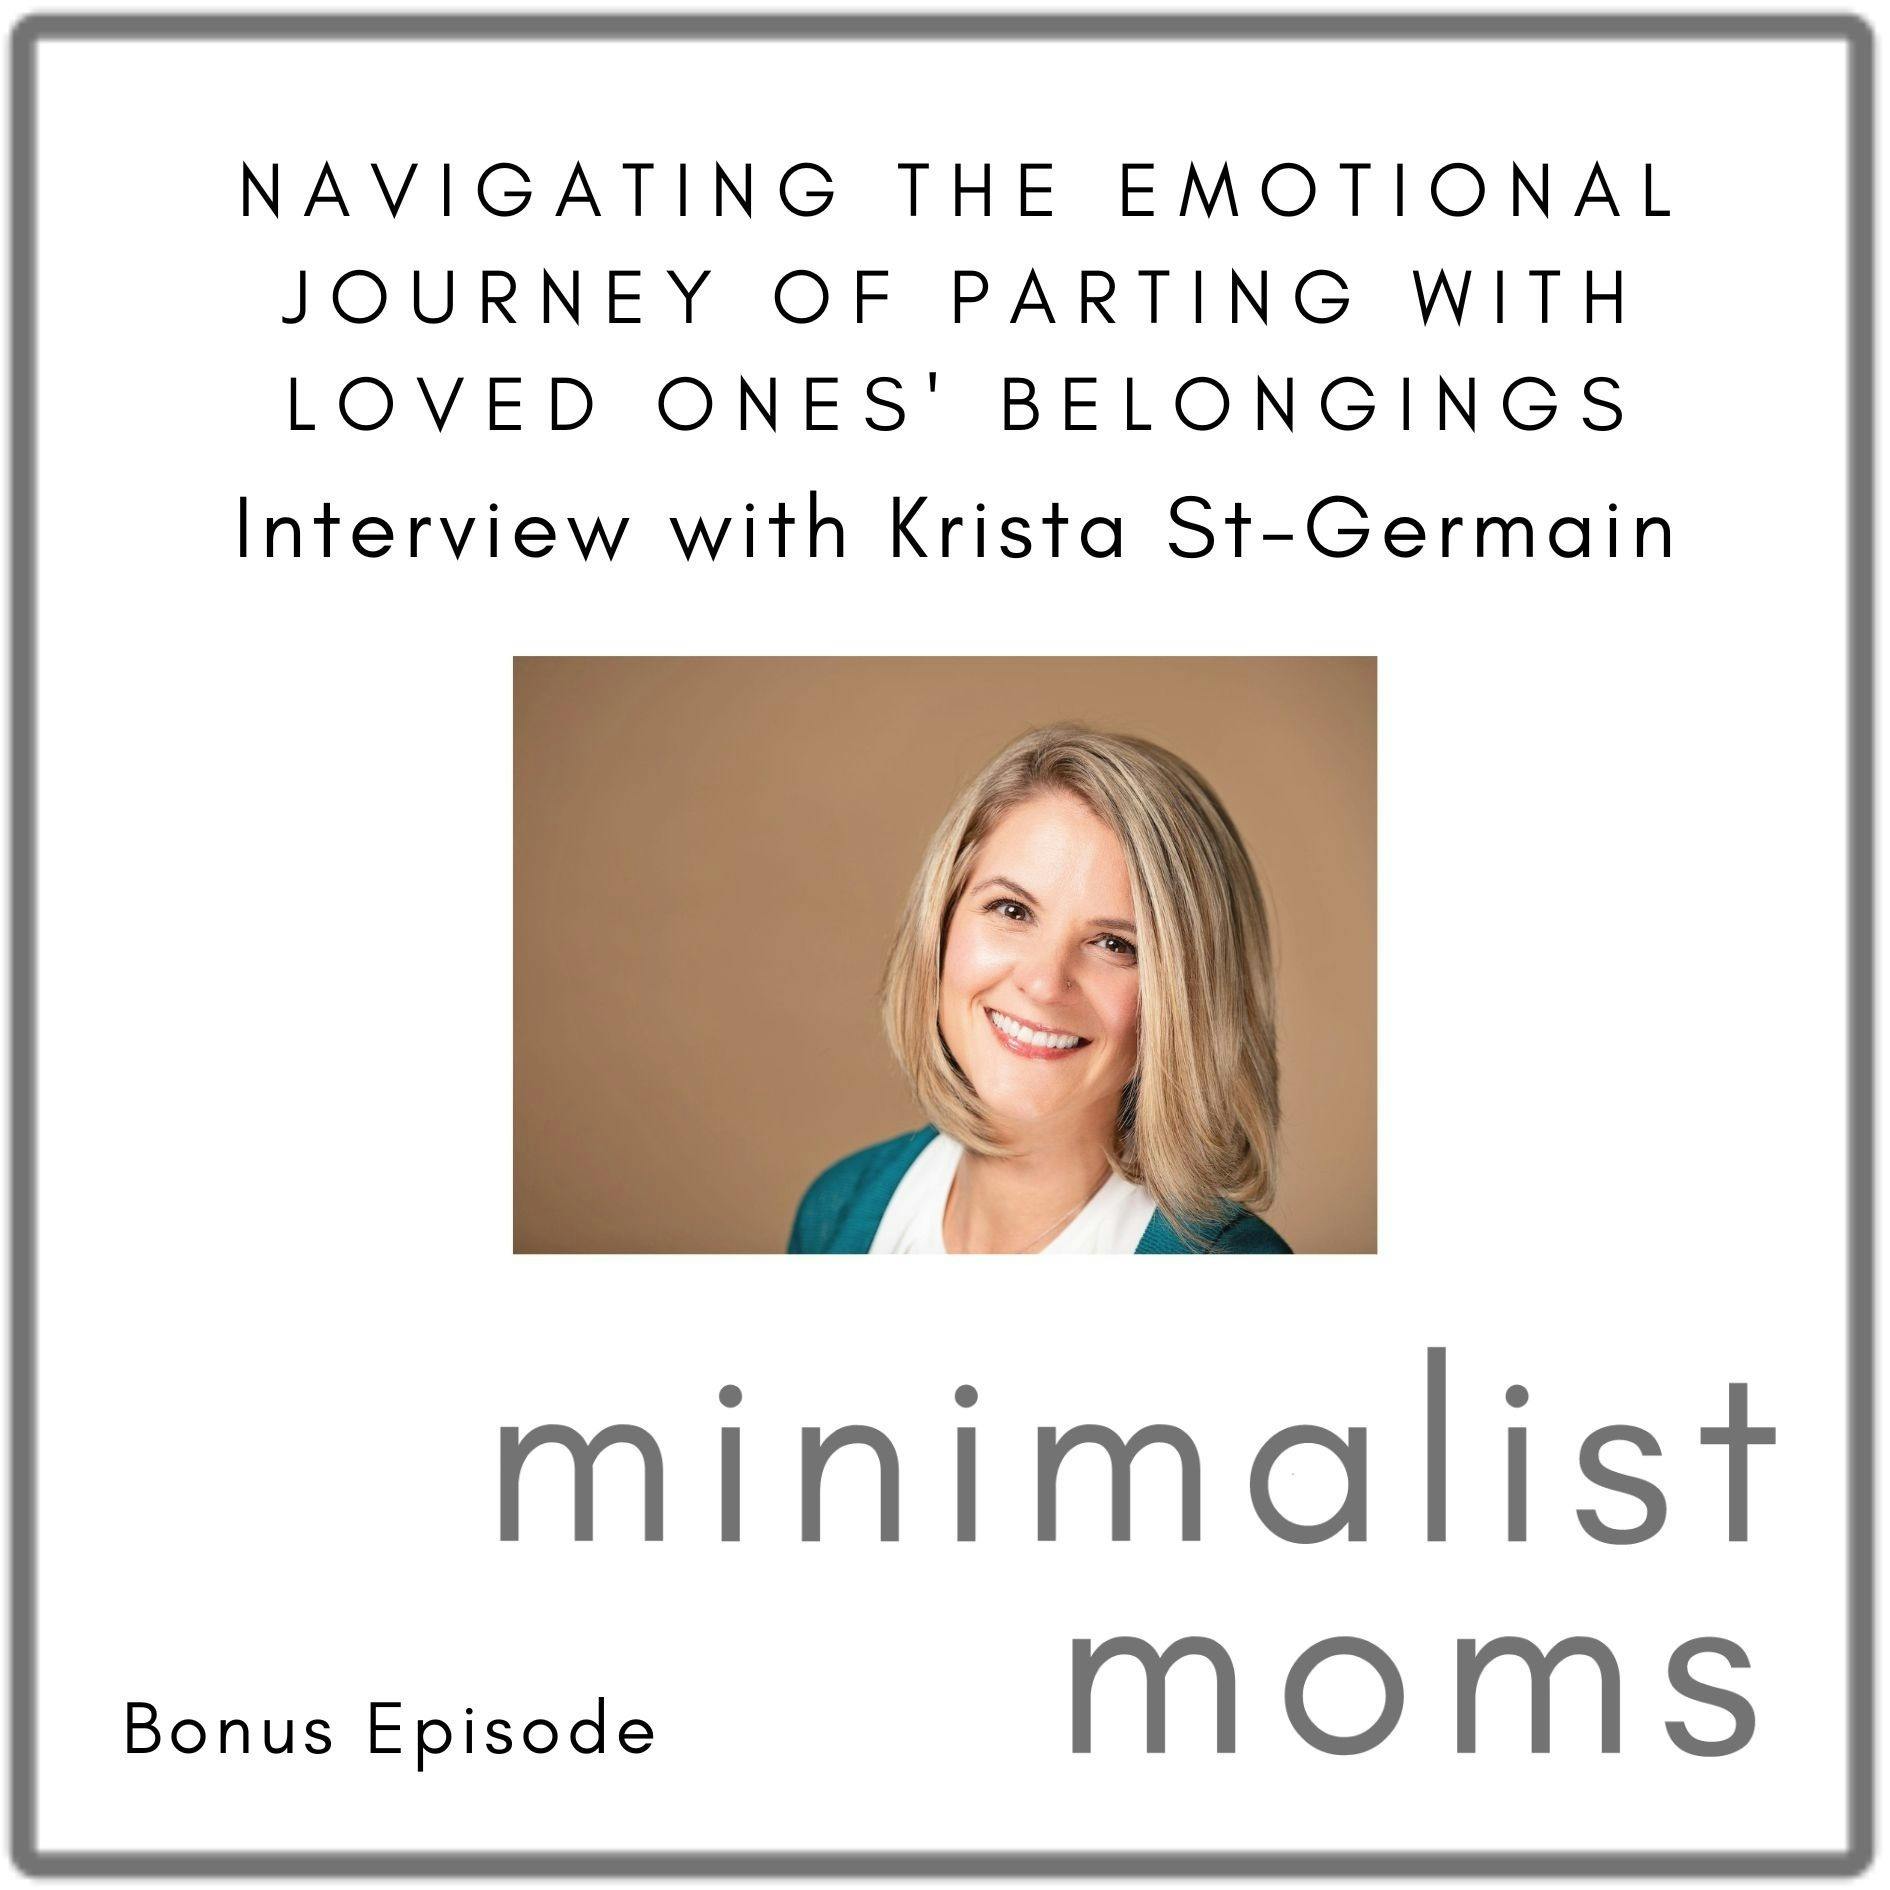 Navigating the Emotional Journey of Parting with Loved Ones' Belongings with Krista St-Germain (Bonus Episode)